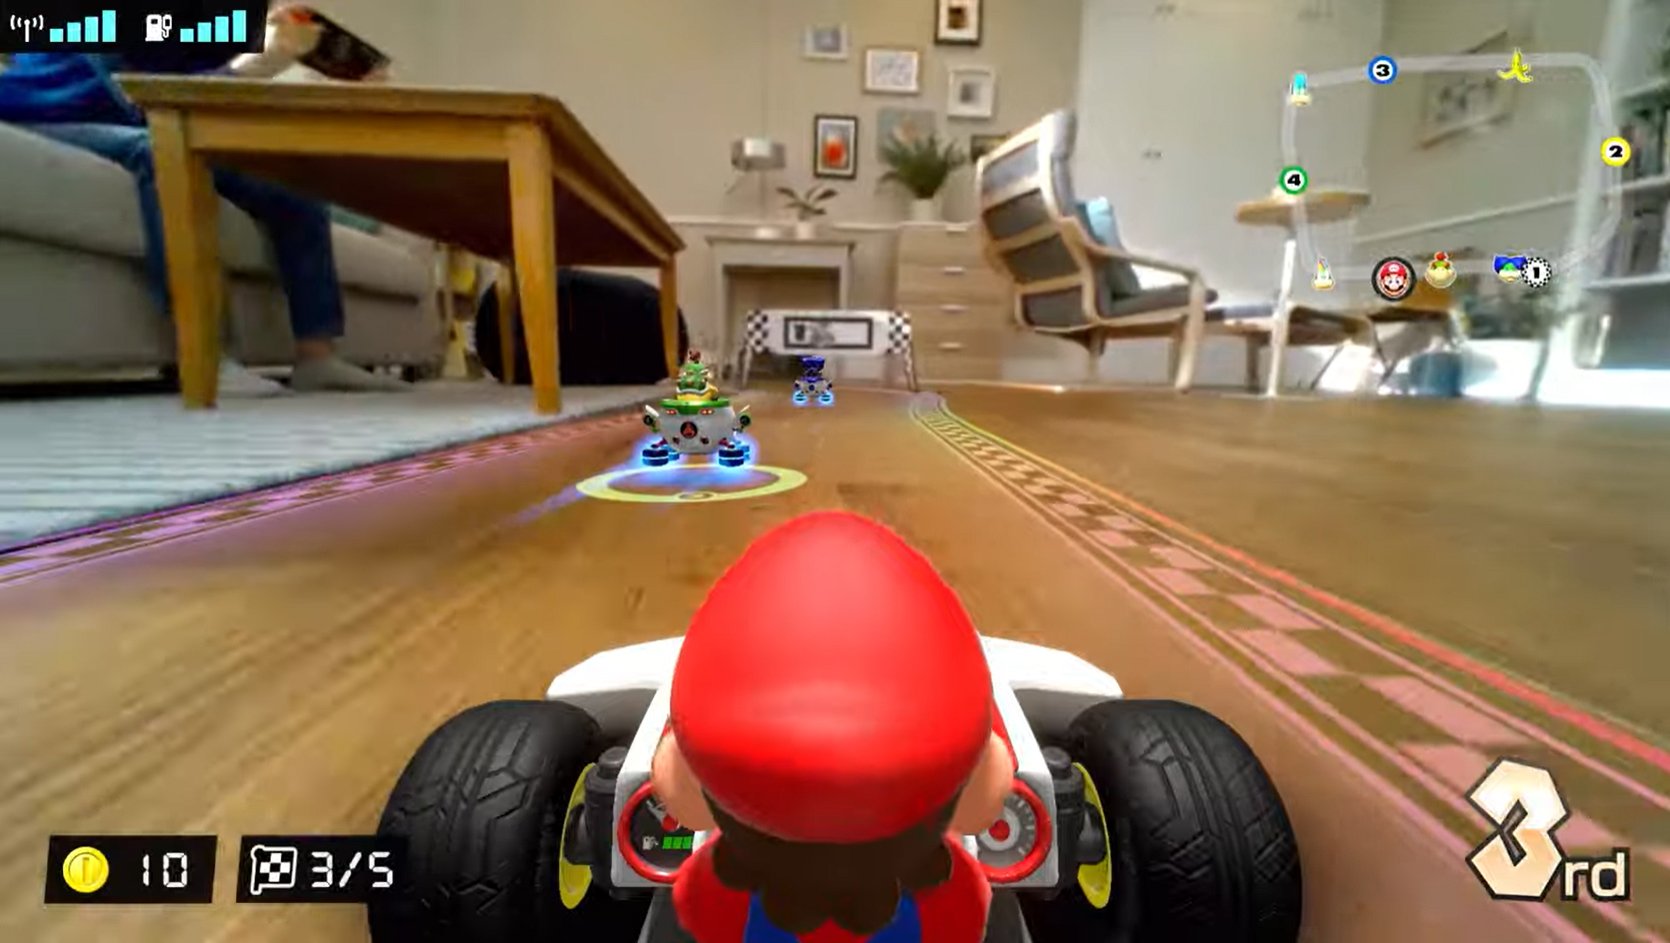 https://www.imore.com/sites/imore.com/files/styles/large/public/field/image/2020/09/mario-kart-live-home-circuit.jpg